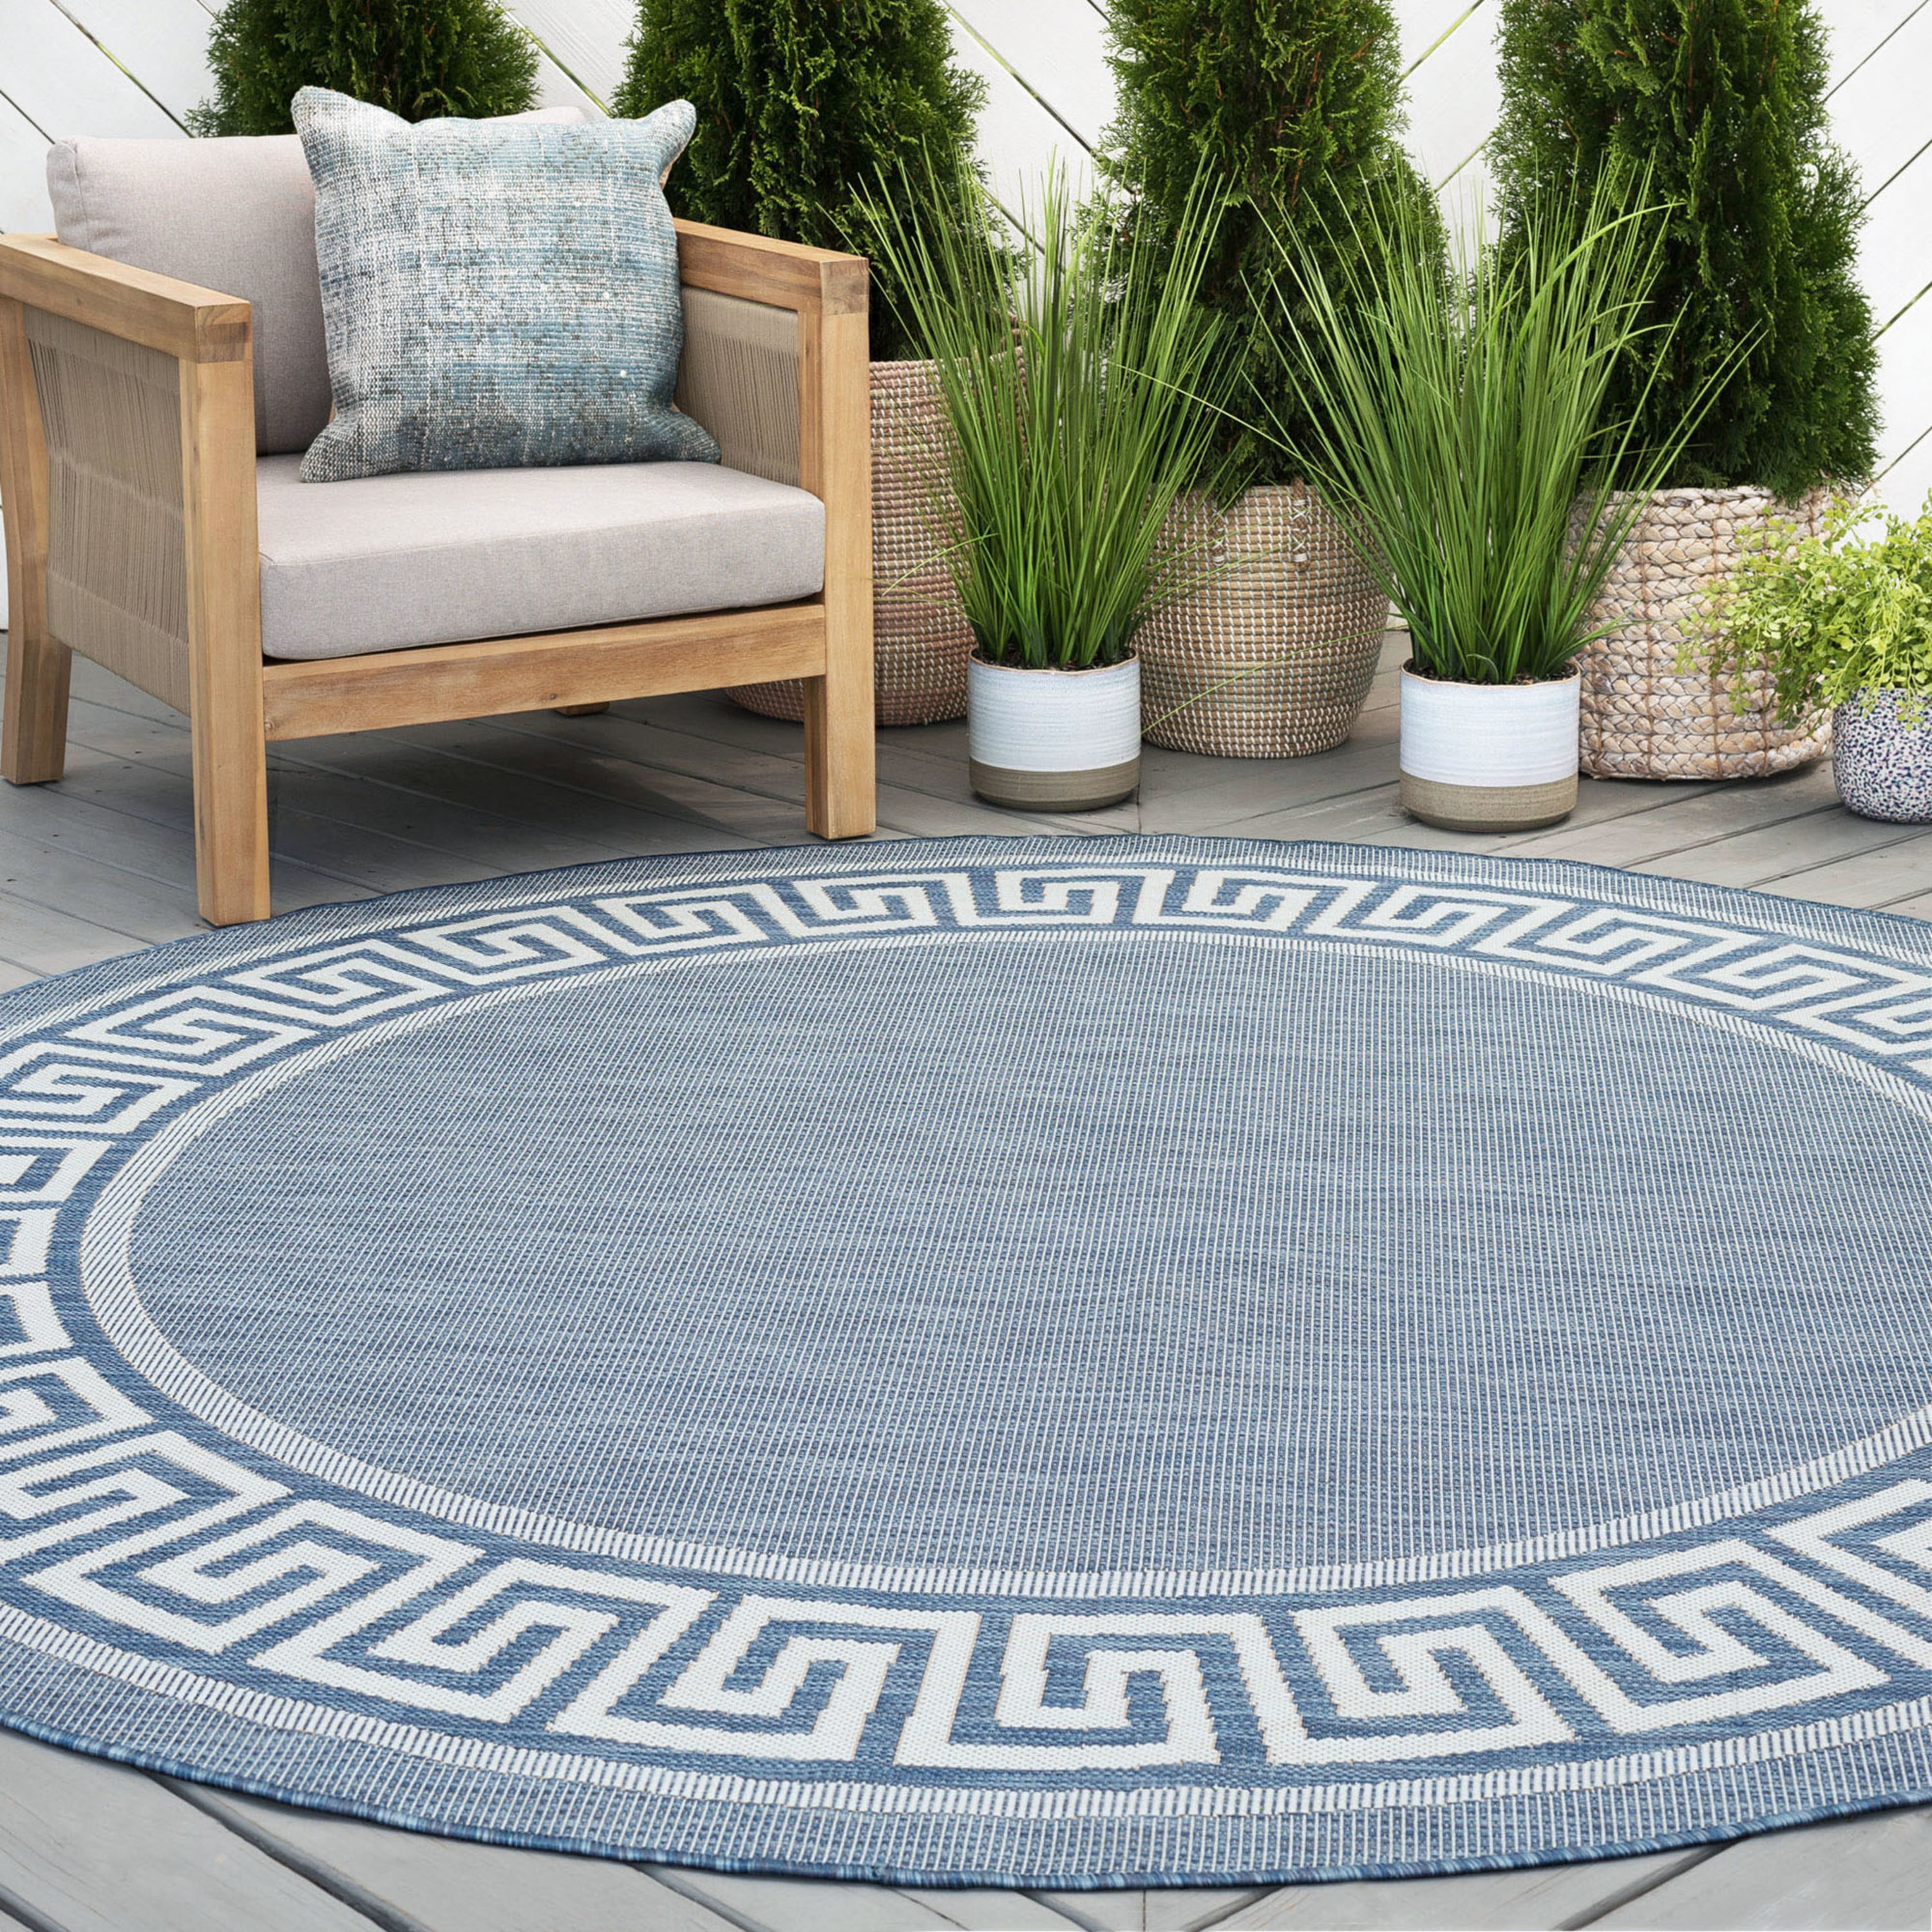 Outdoor Area Rugs for Patio 5x8FT, Teal Blue Gray Green Fish Scales  Entryway Rug Carpet Doormat, Large Floor Mat for Porch, Backyard, Apartment